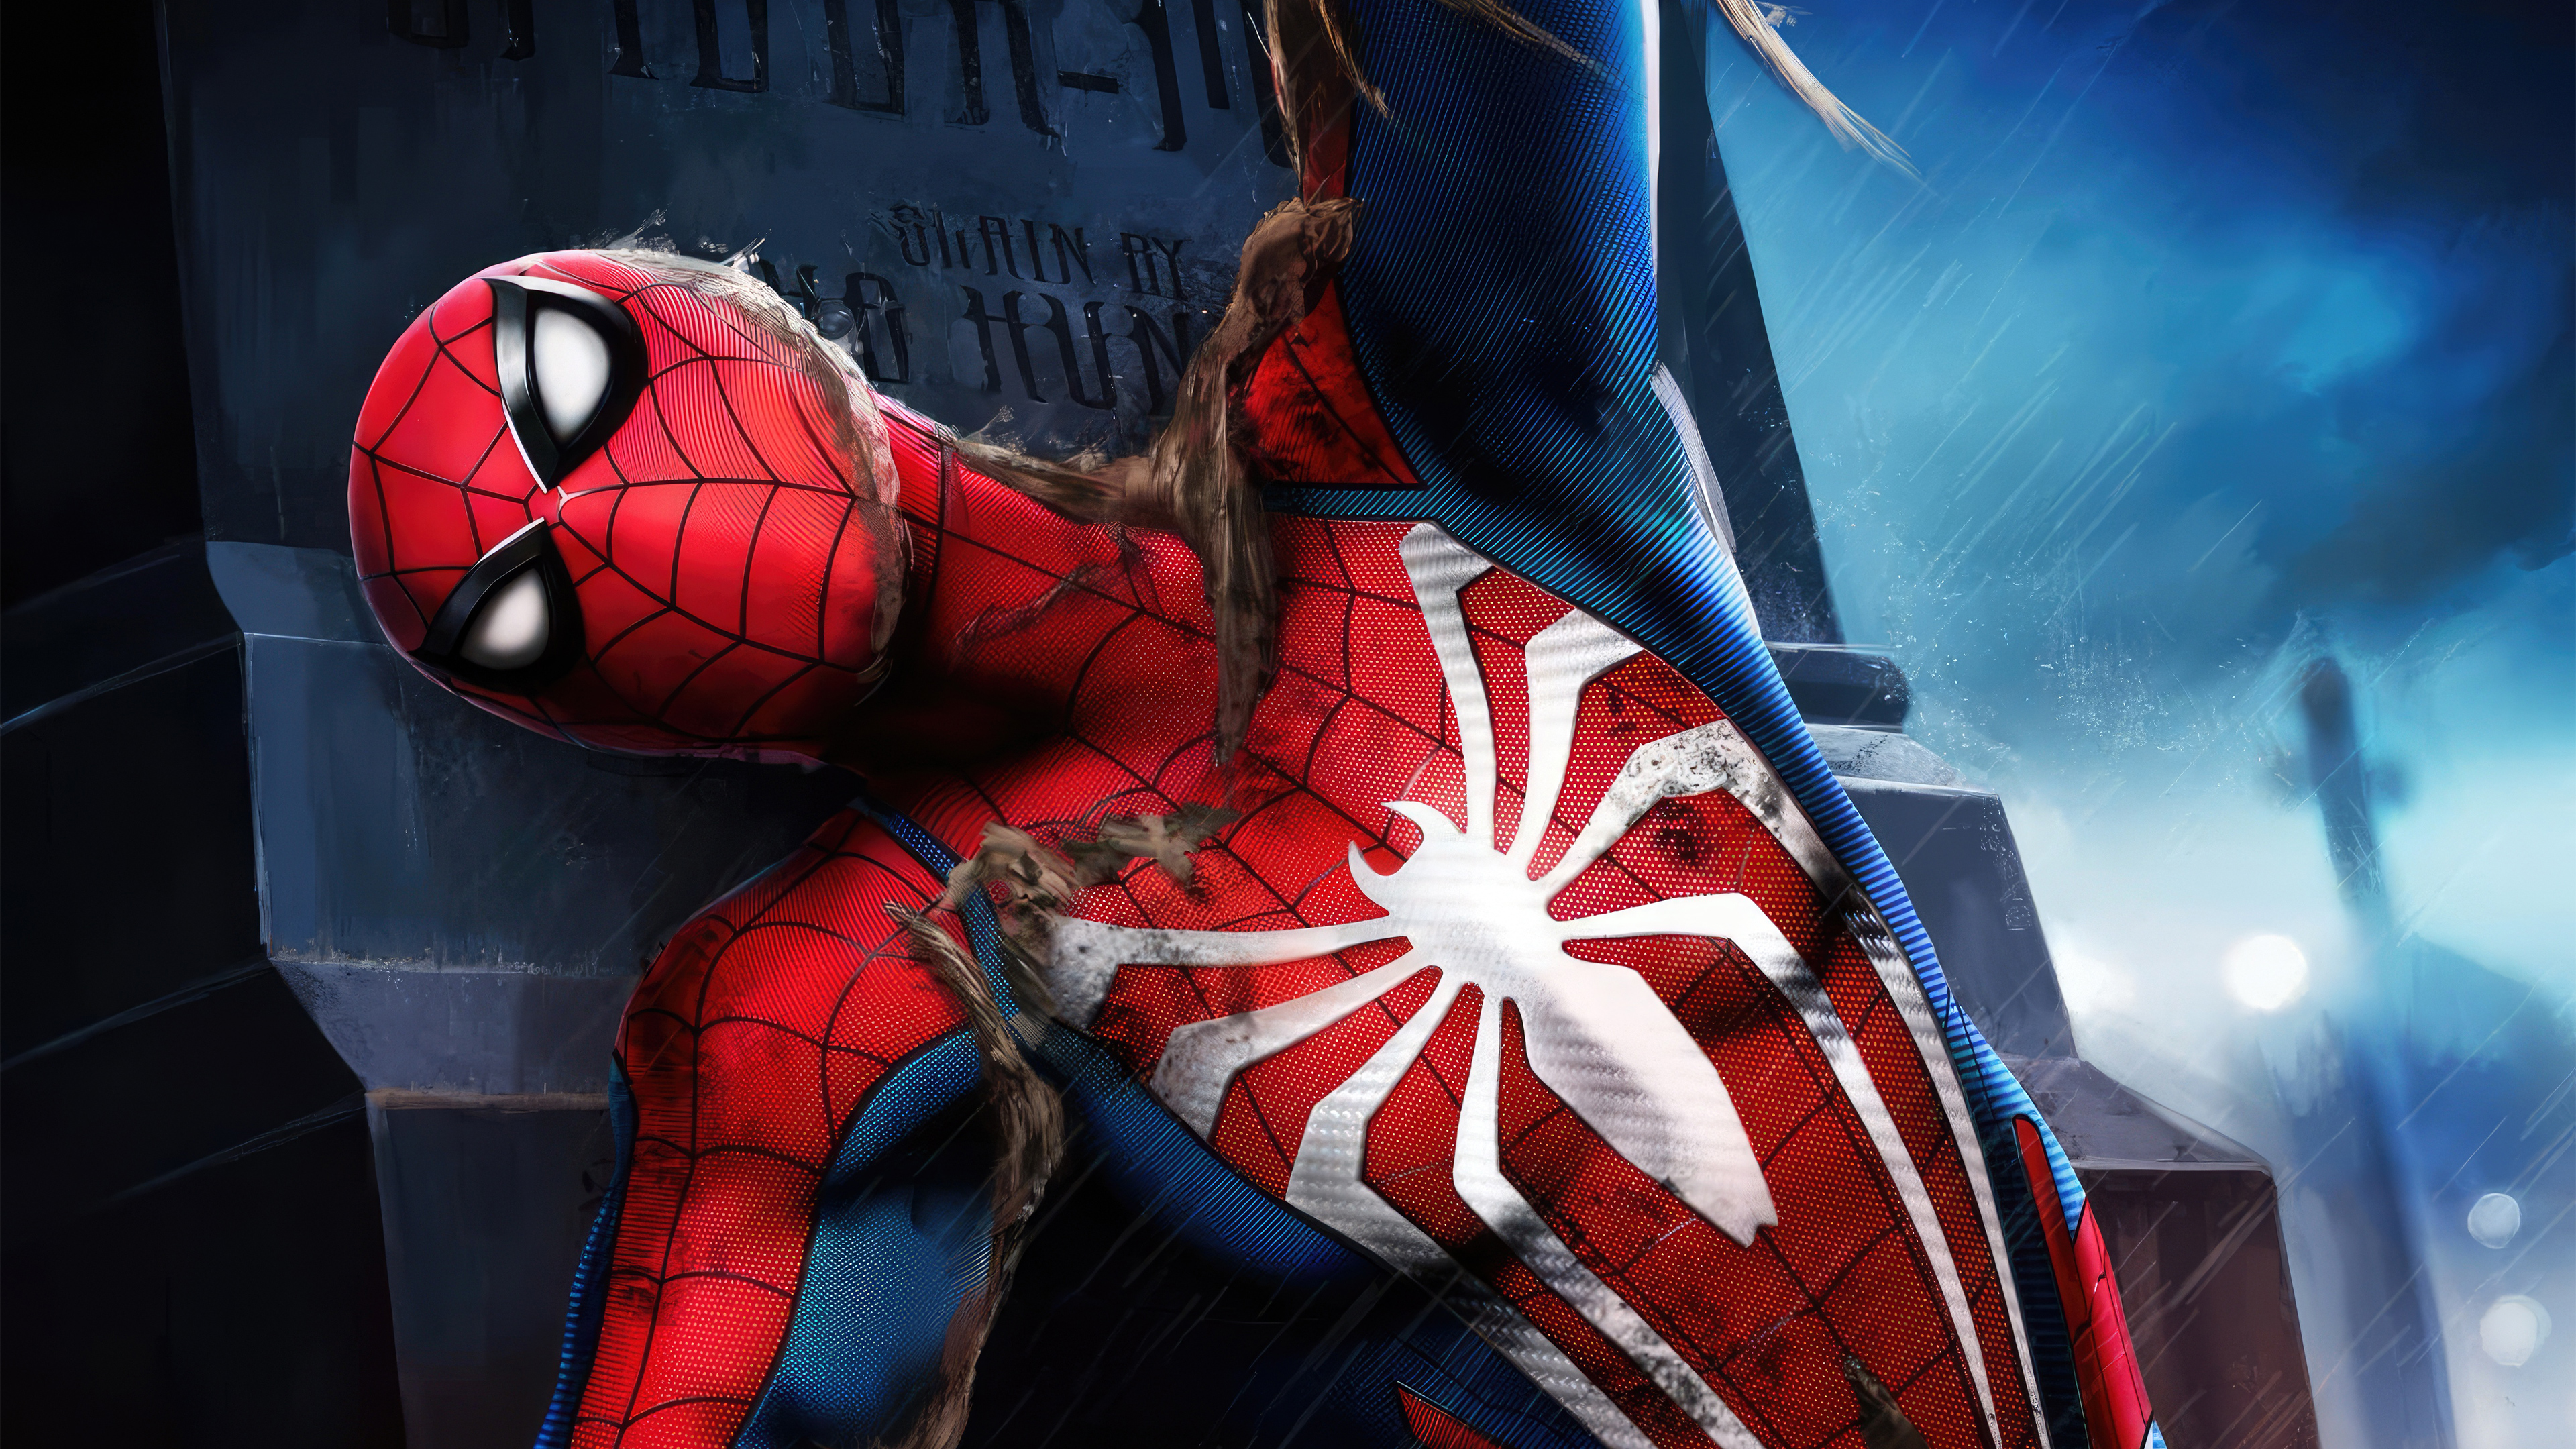 506371 1920x1536 the amazing spider man 2 full hd wallpapers new  Rare  Gallery HD Wallpapers